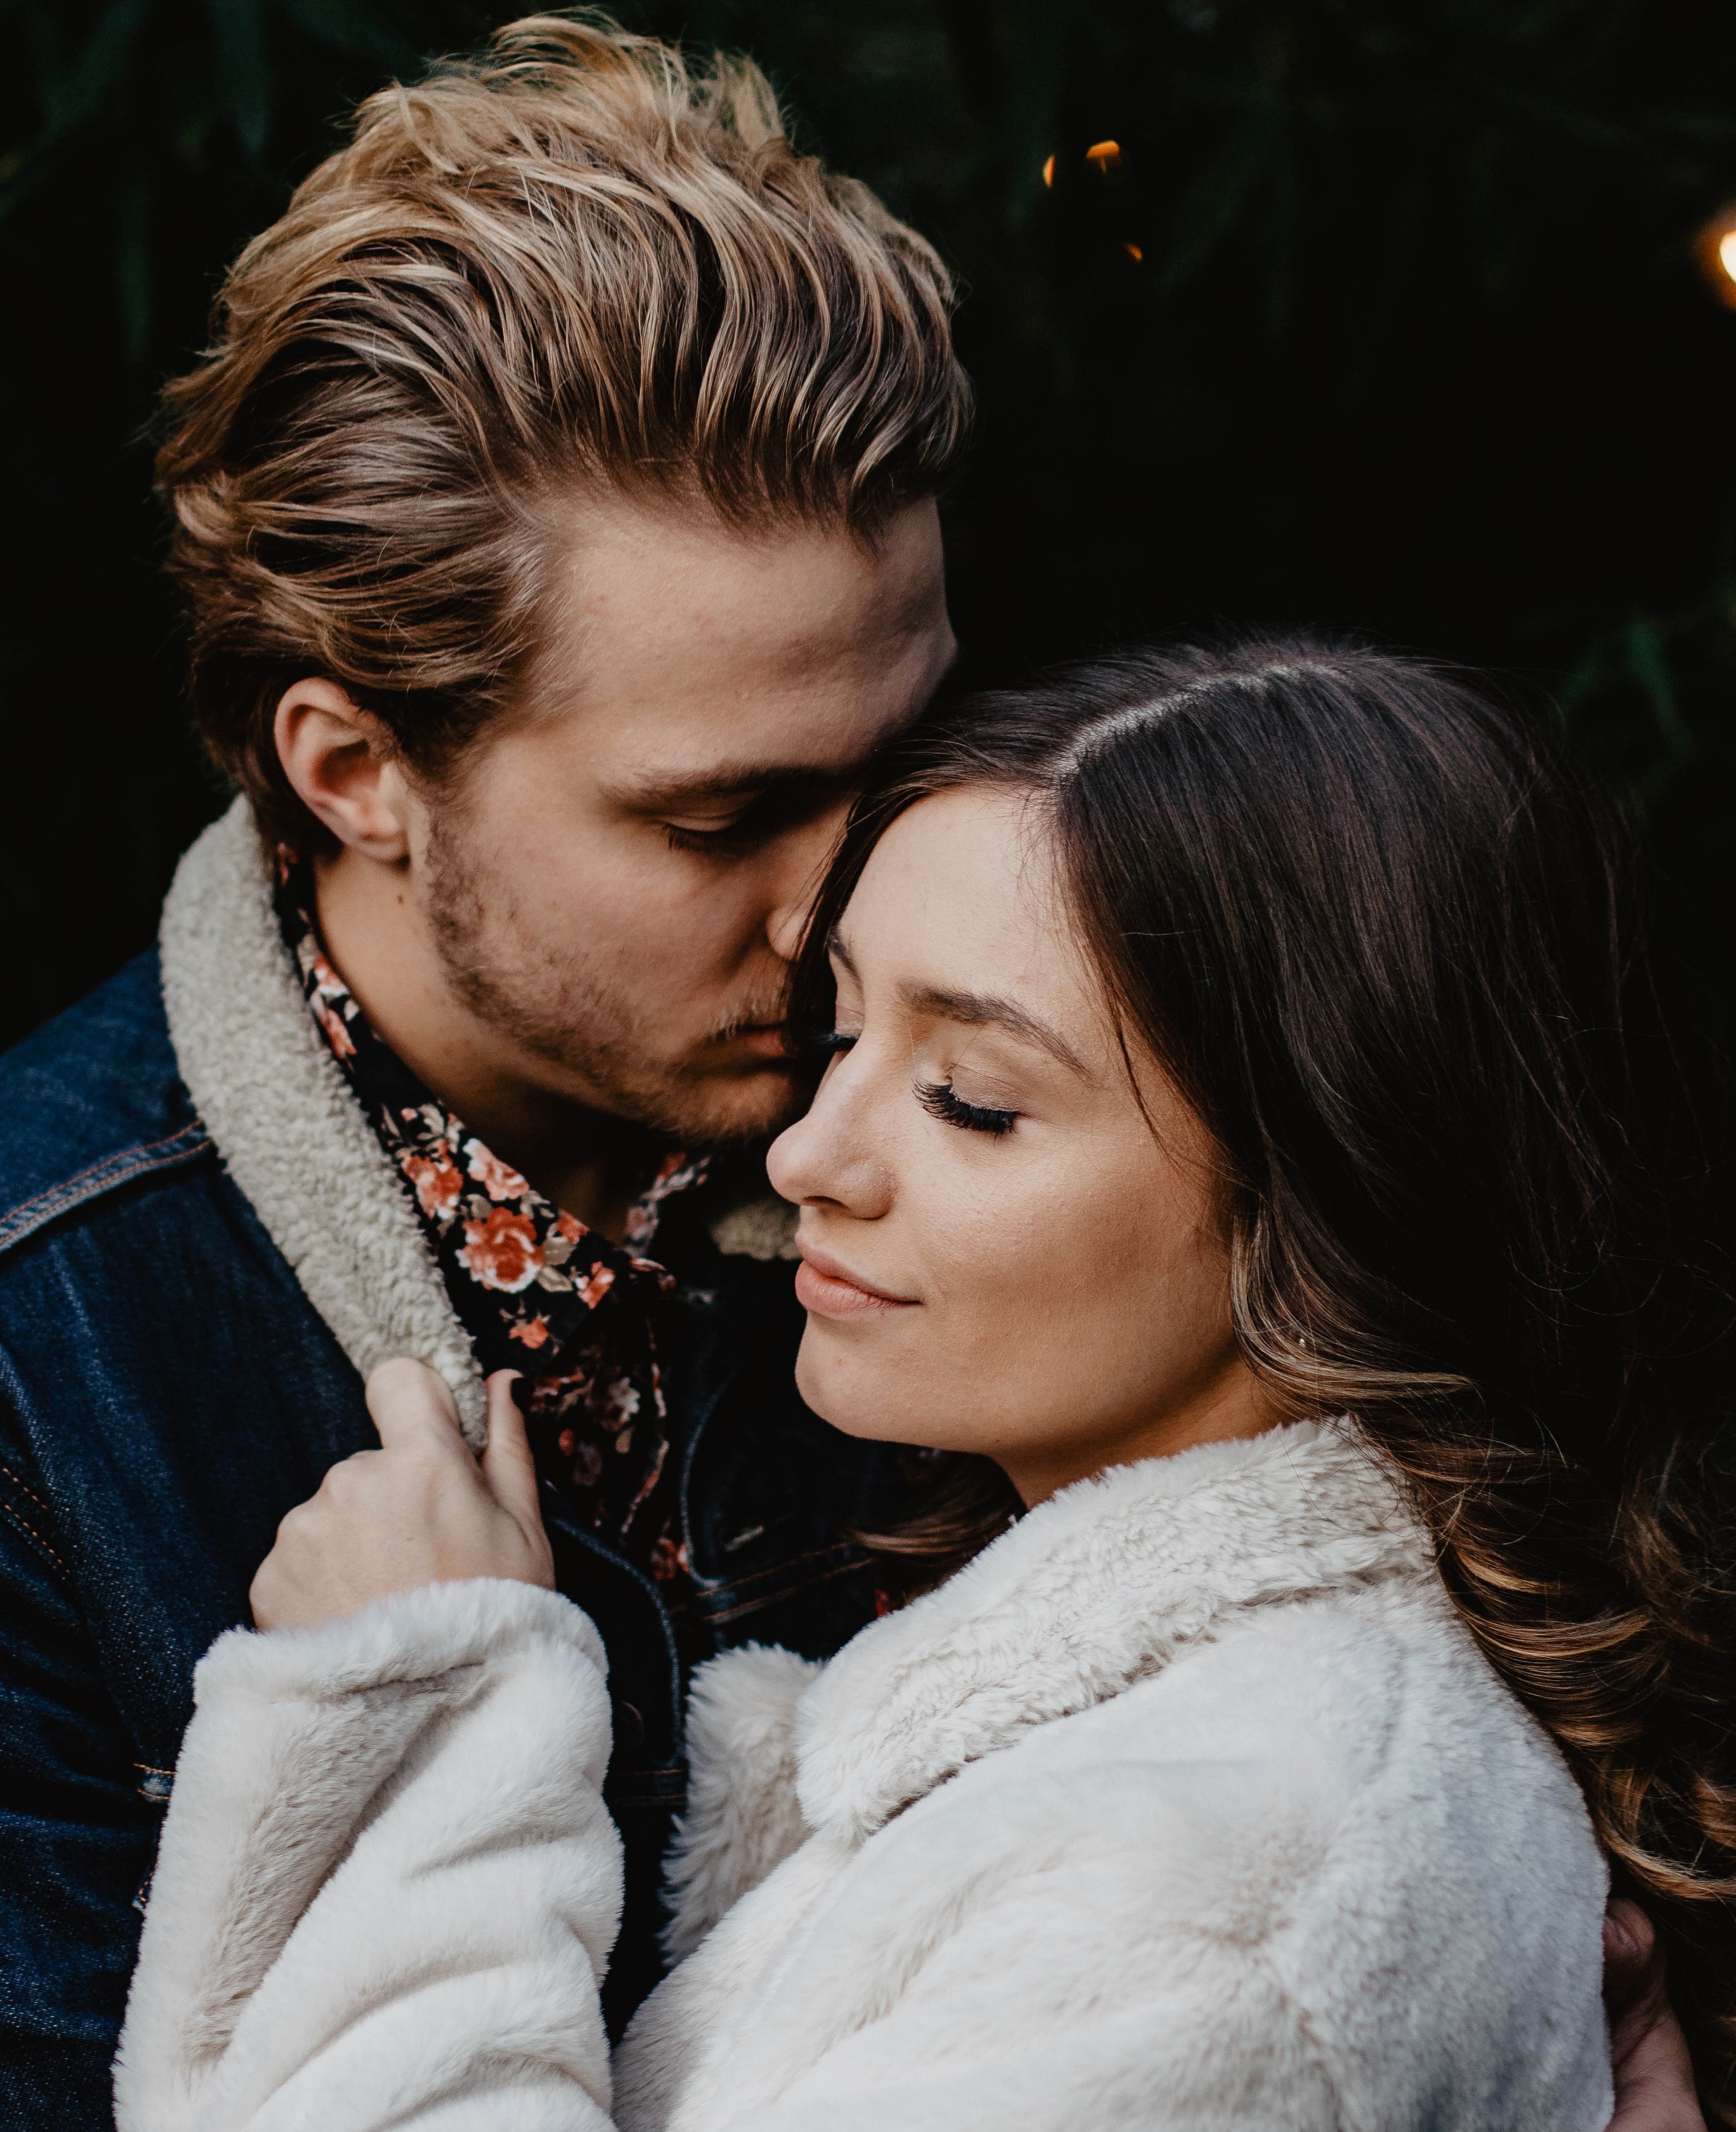 Young couple in love. | Source: Unsplash